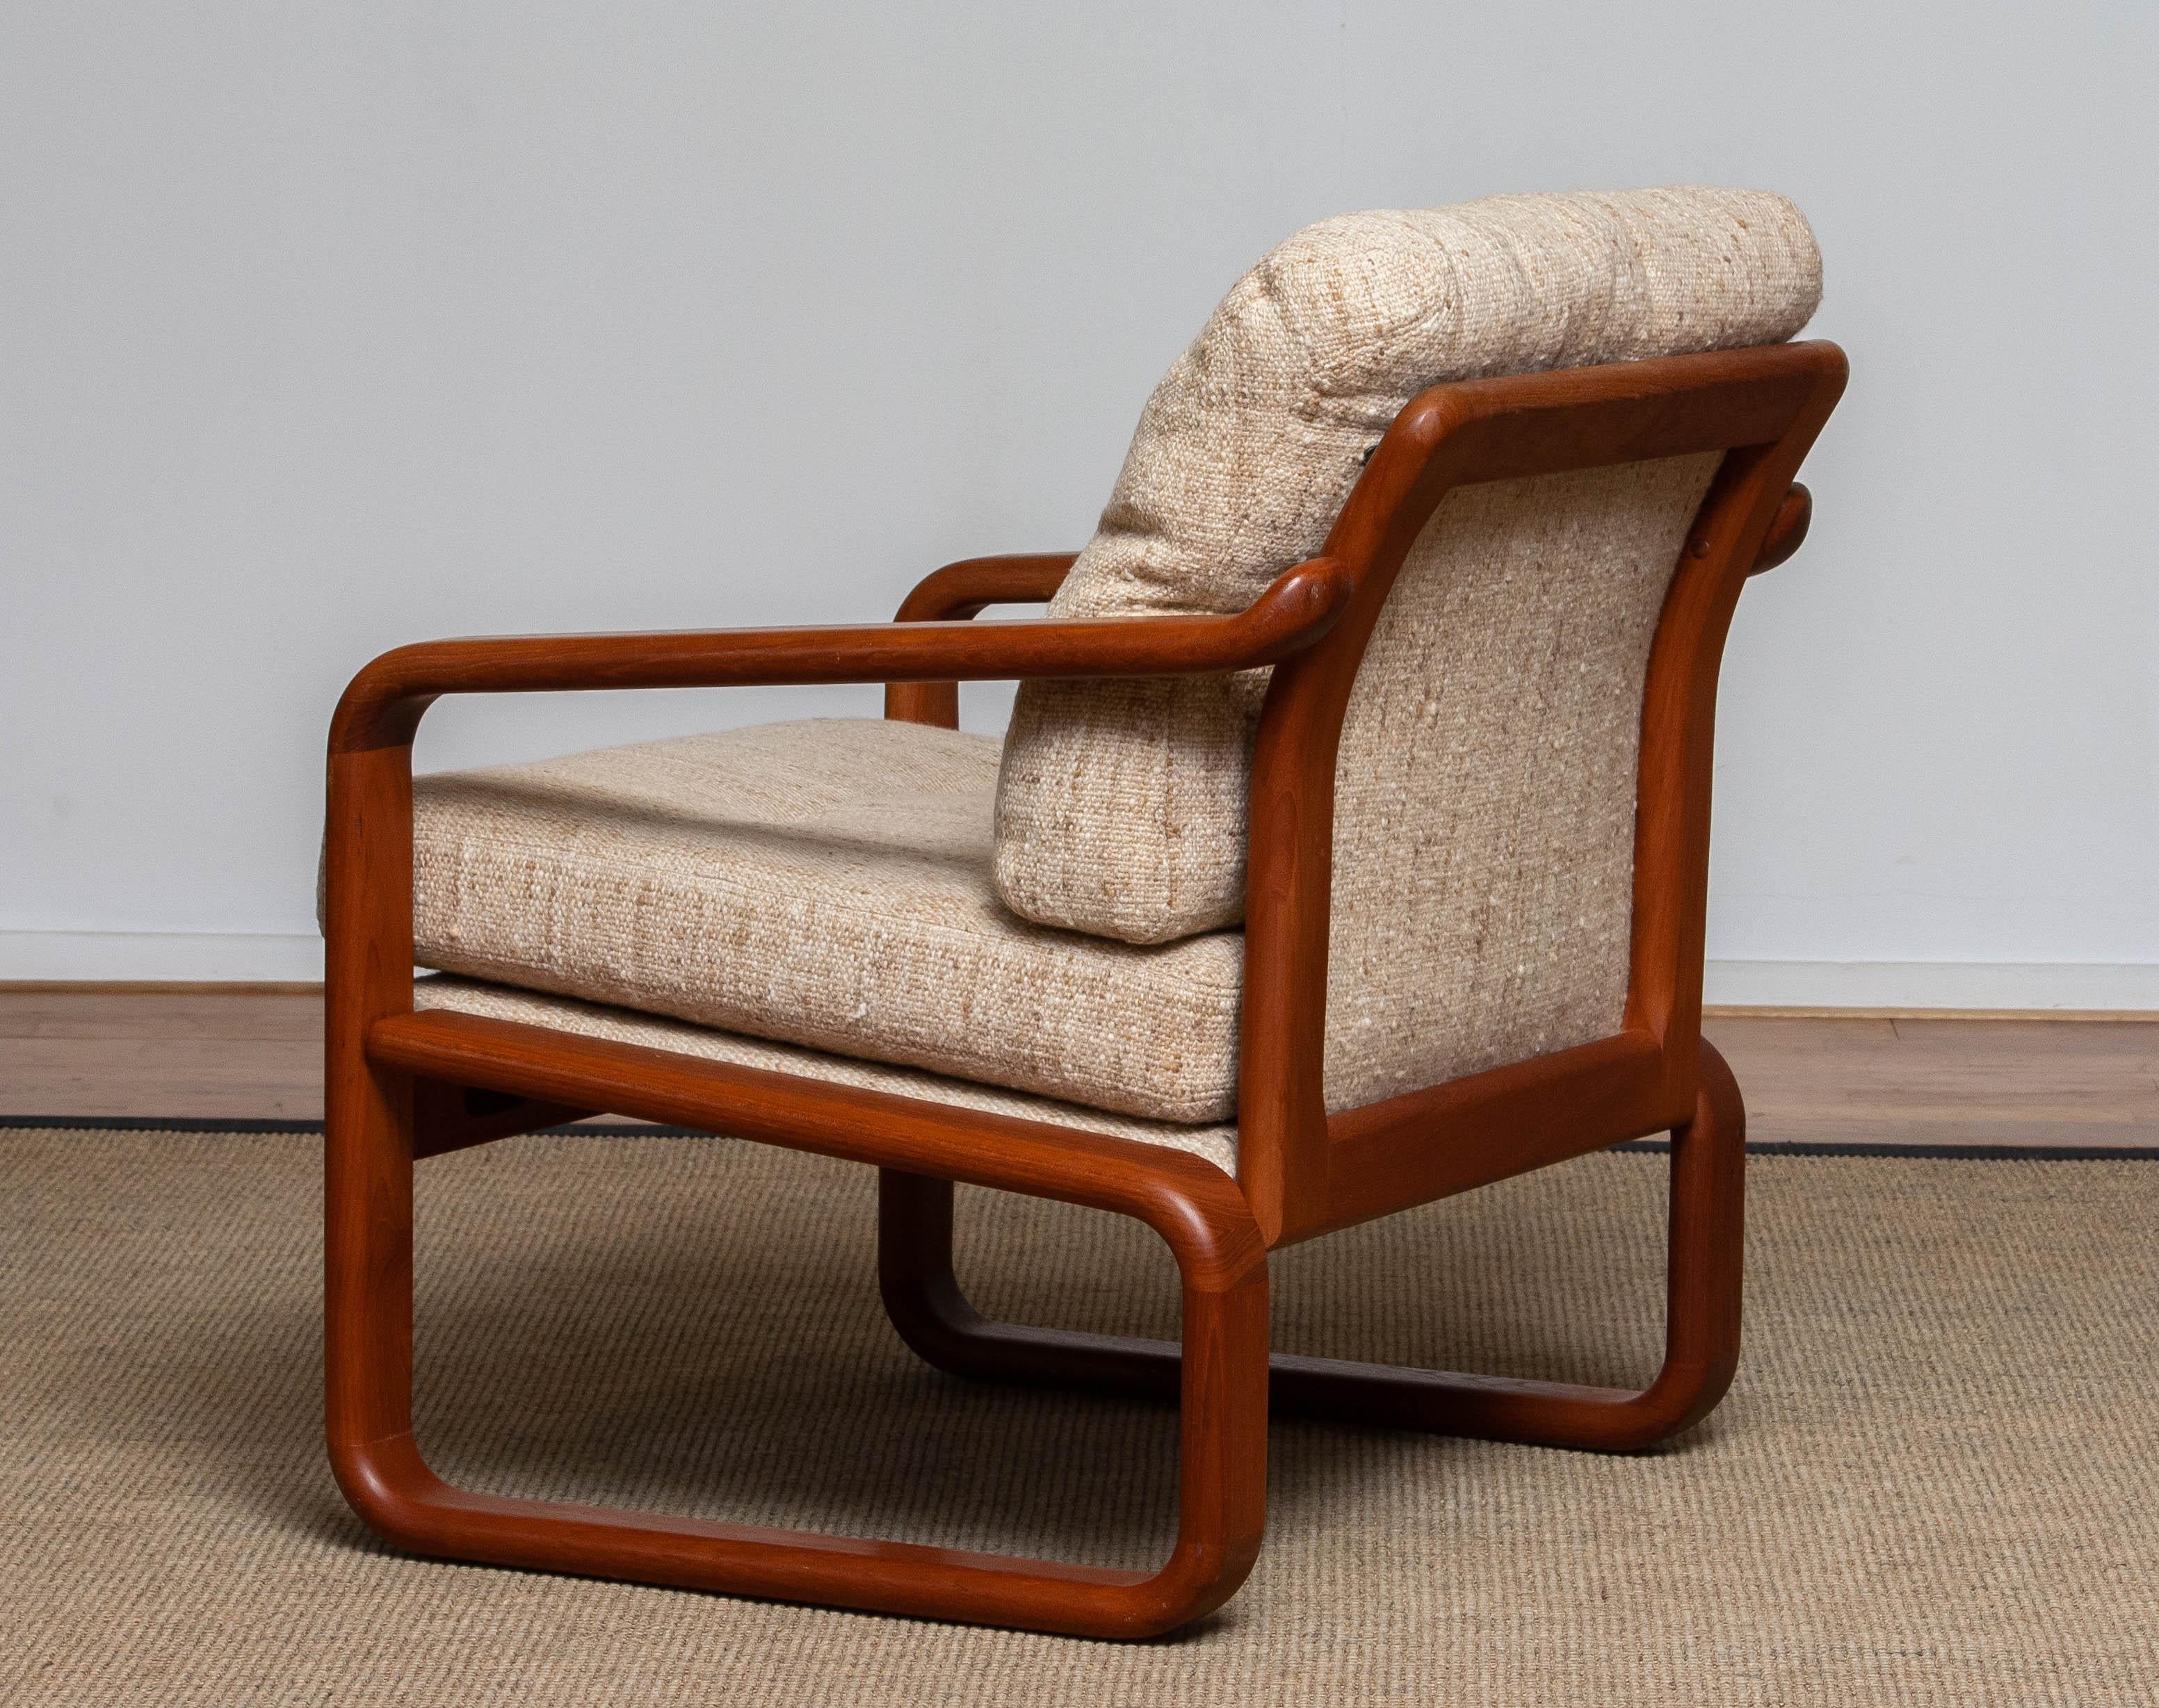 1980's Teak with Wool Cushions Lounge / Easy / Club Chair by Hs Design, Denmark In Good Condition For Sale In Silvolde, Gelderland